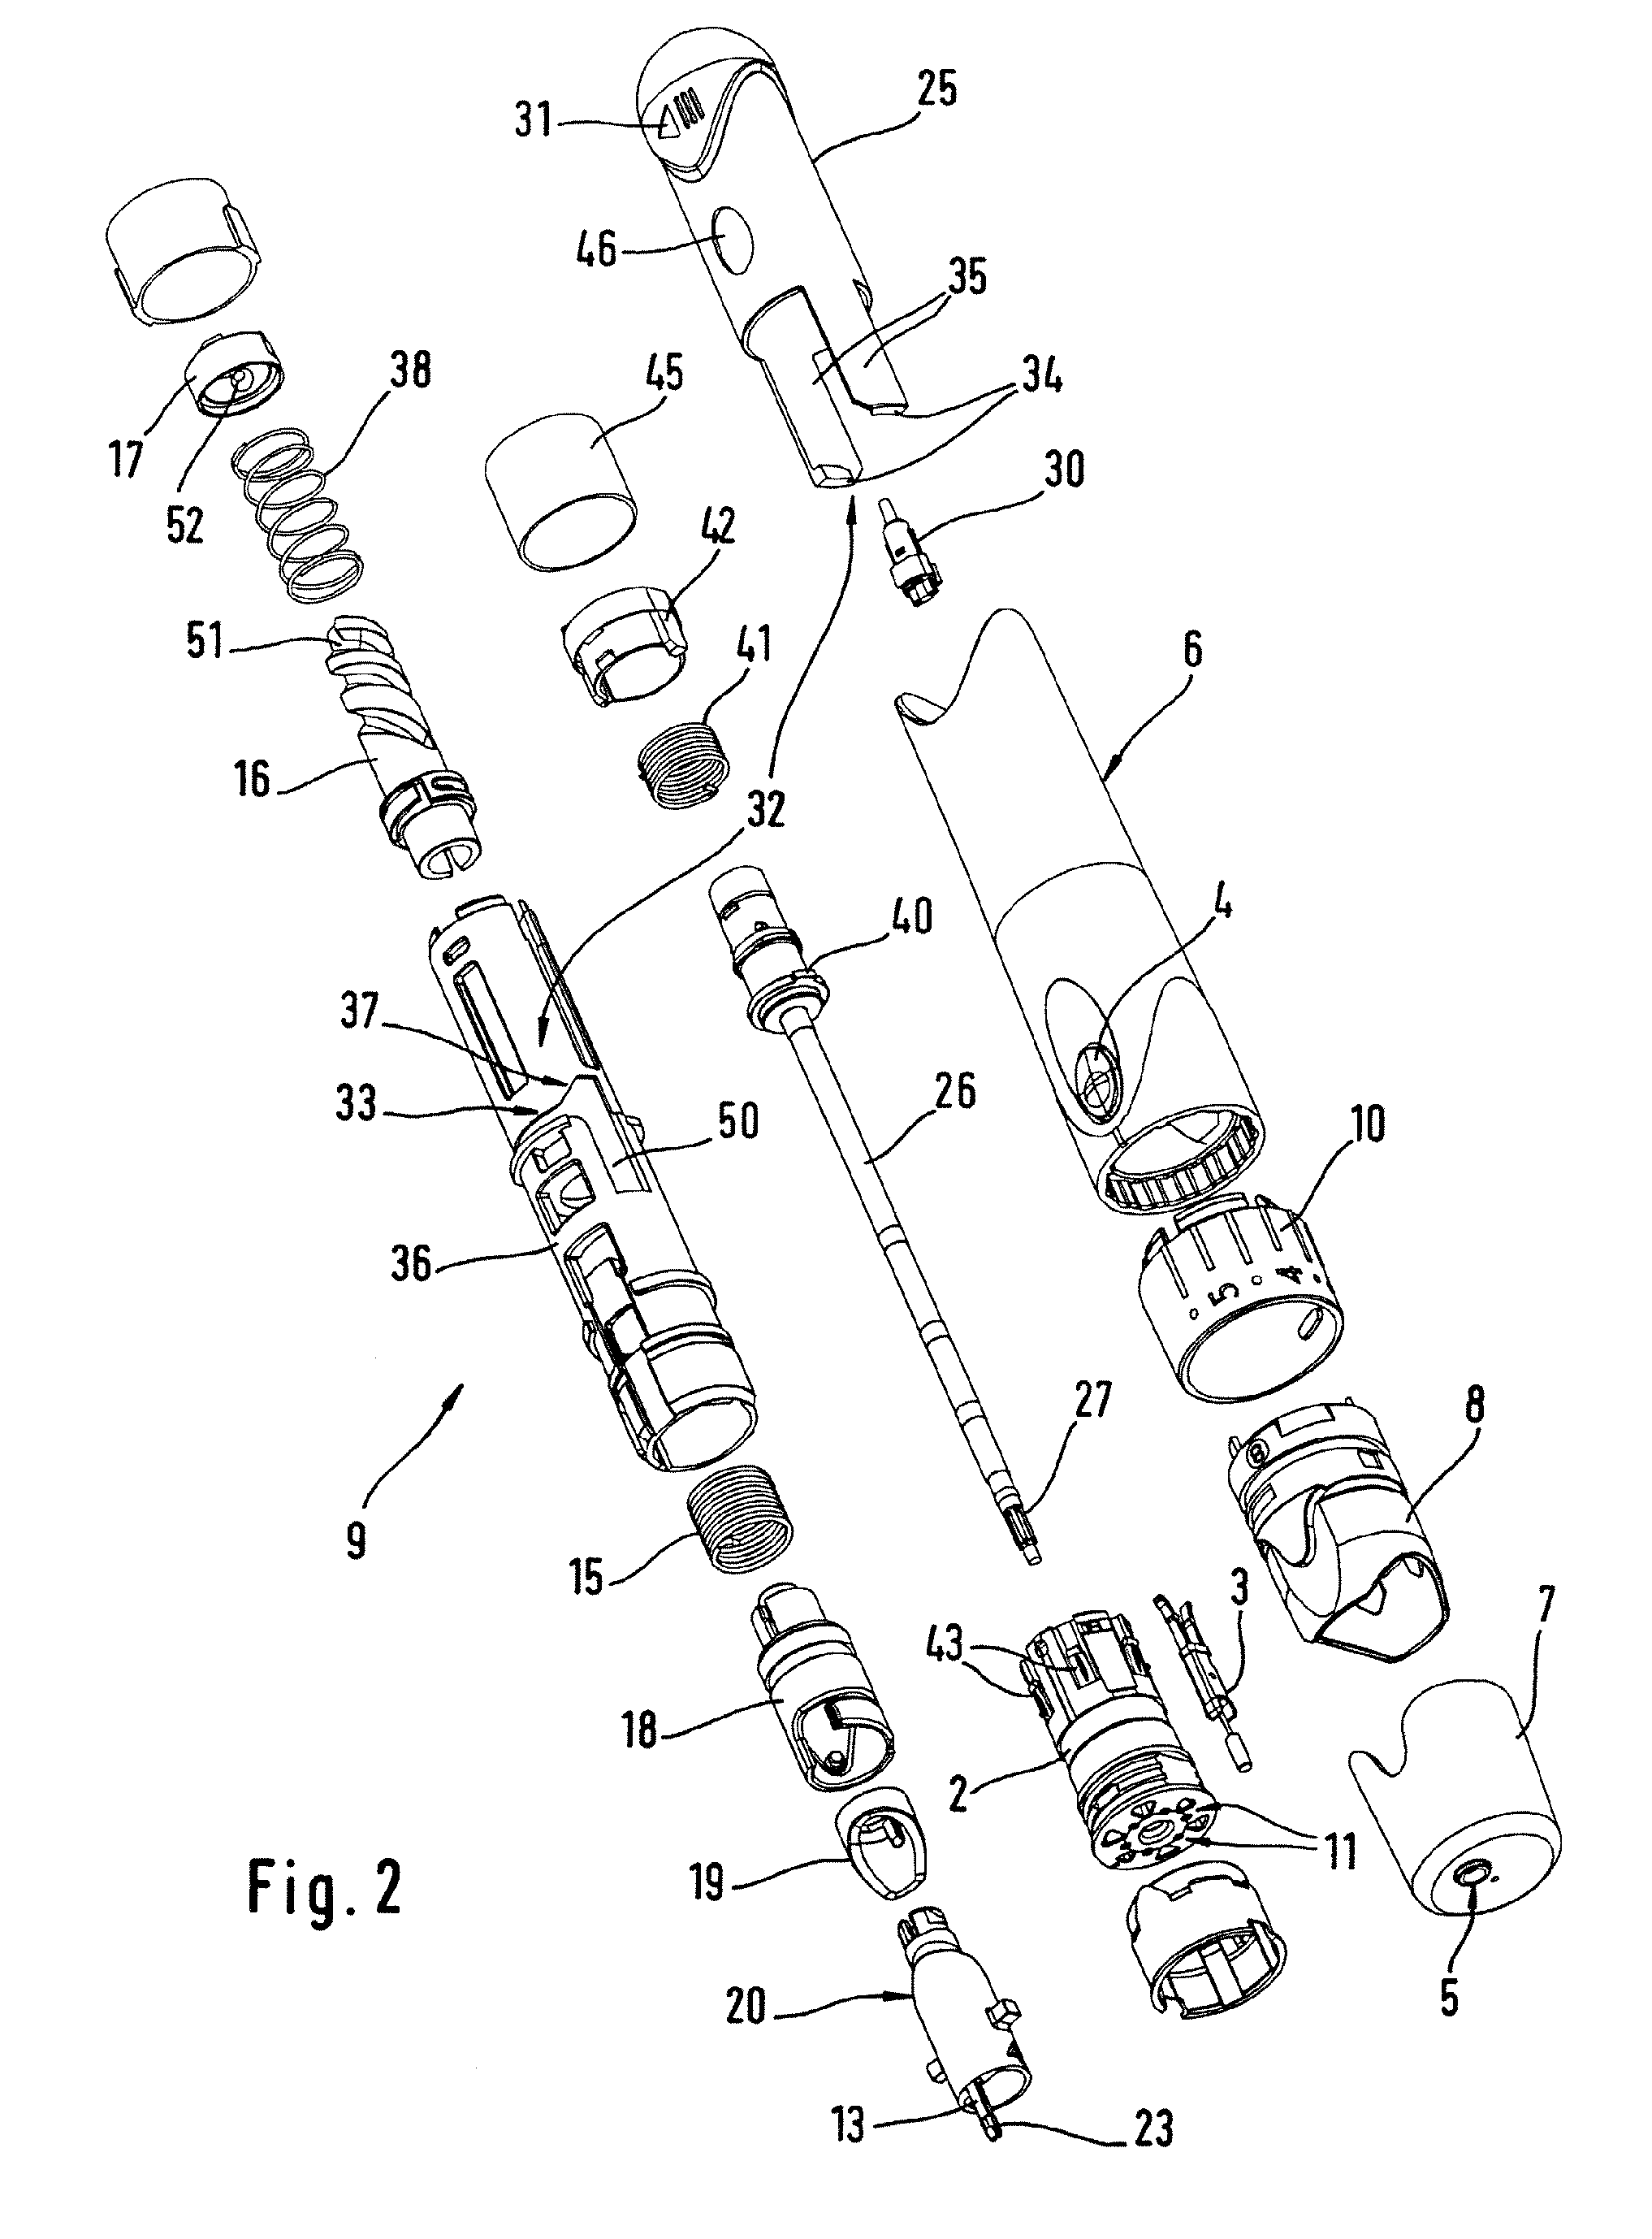 Lancing apparatus for producing a puncture wound